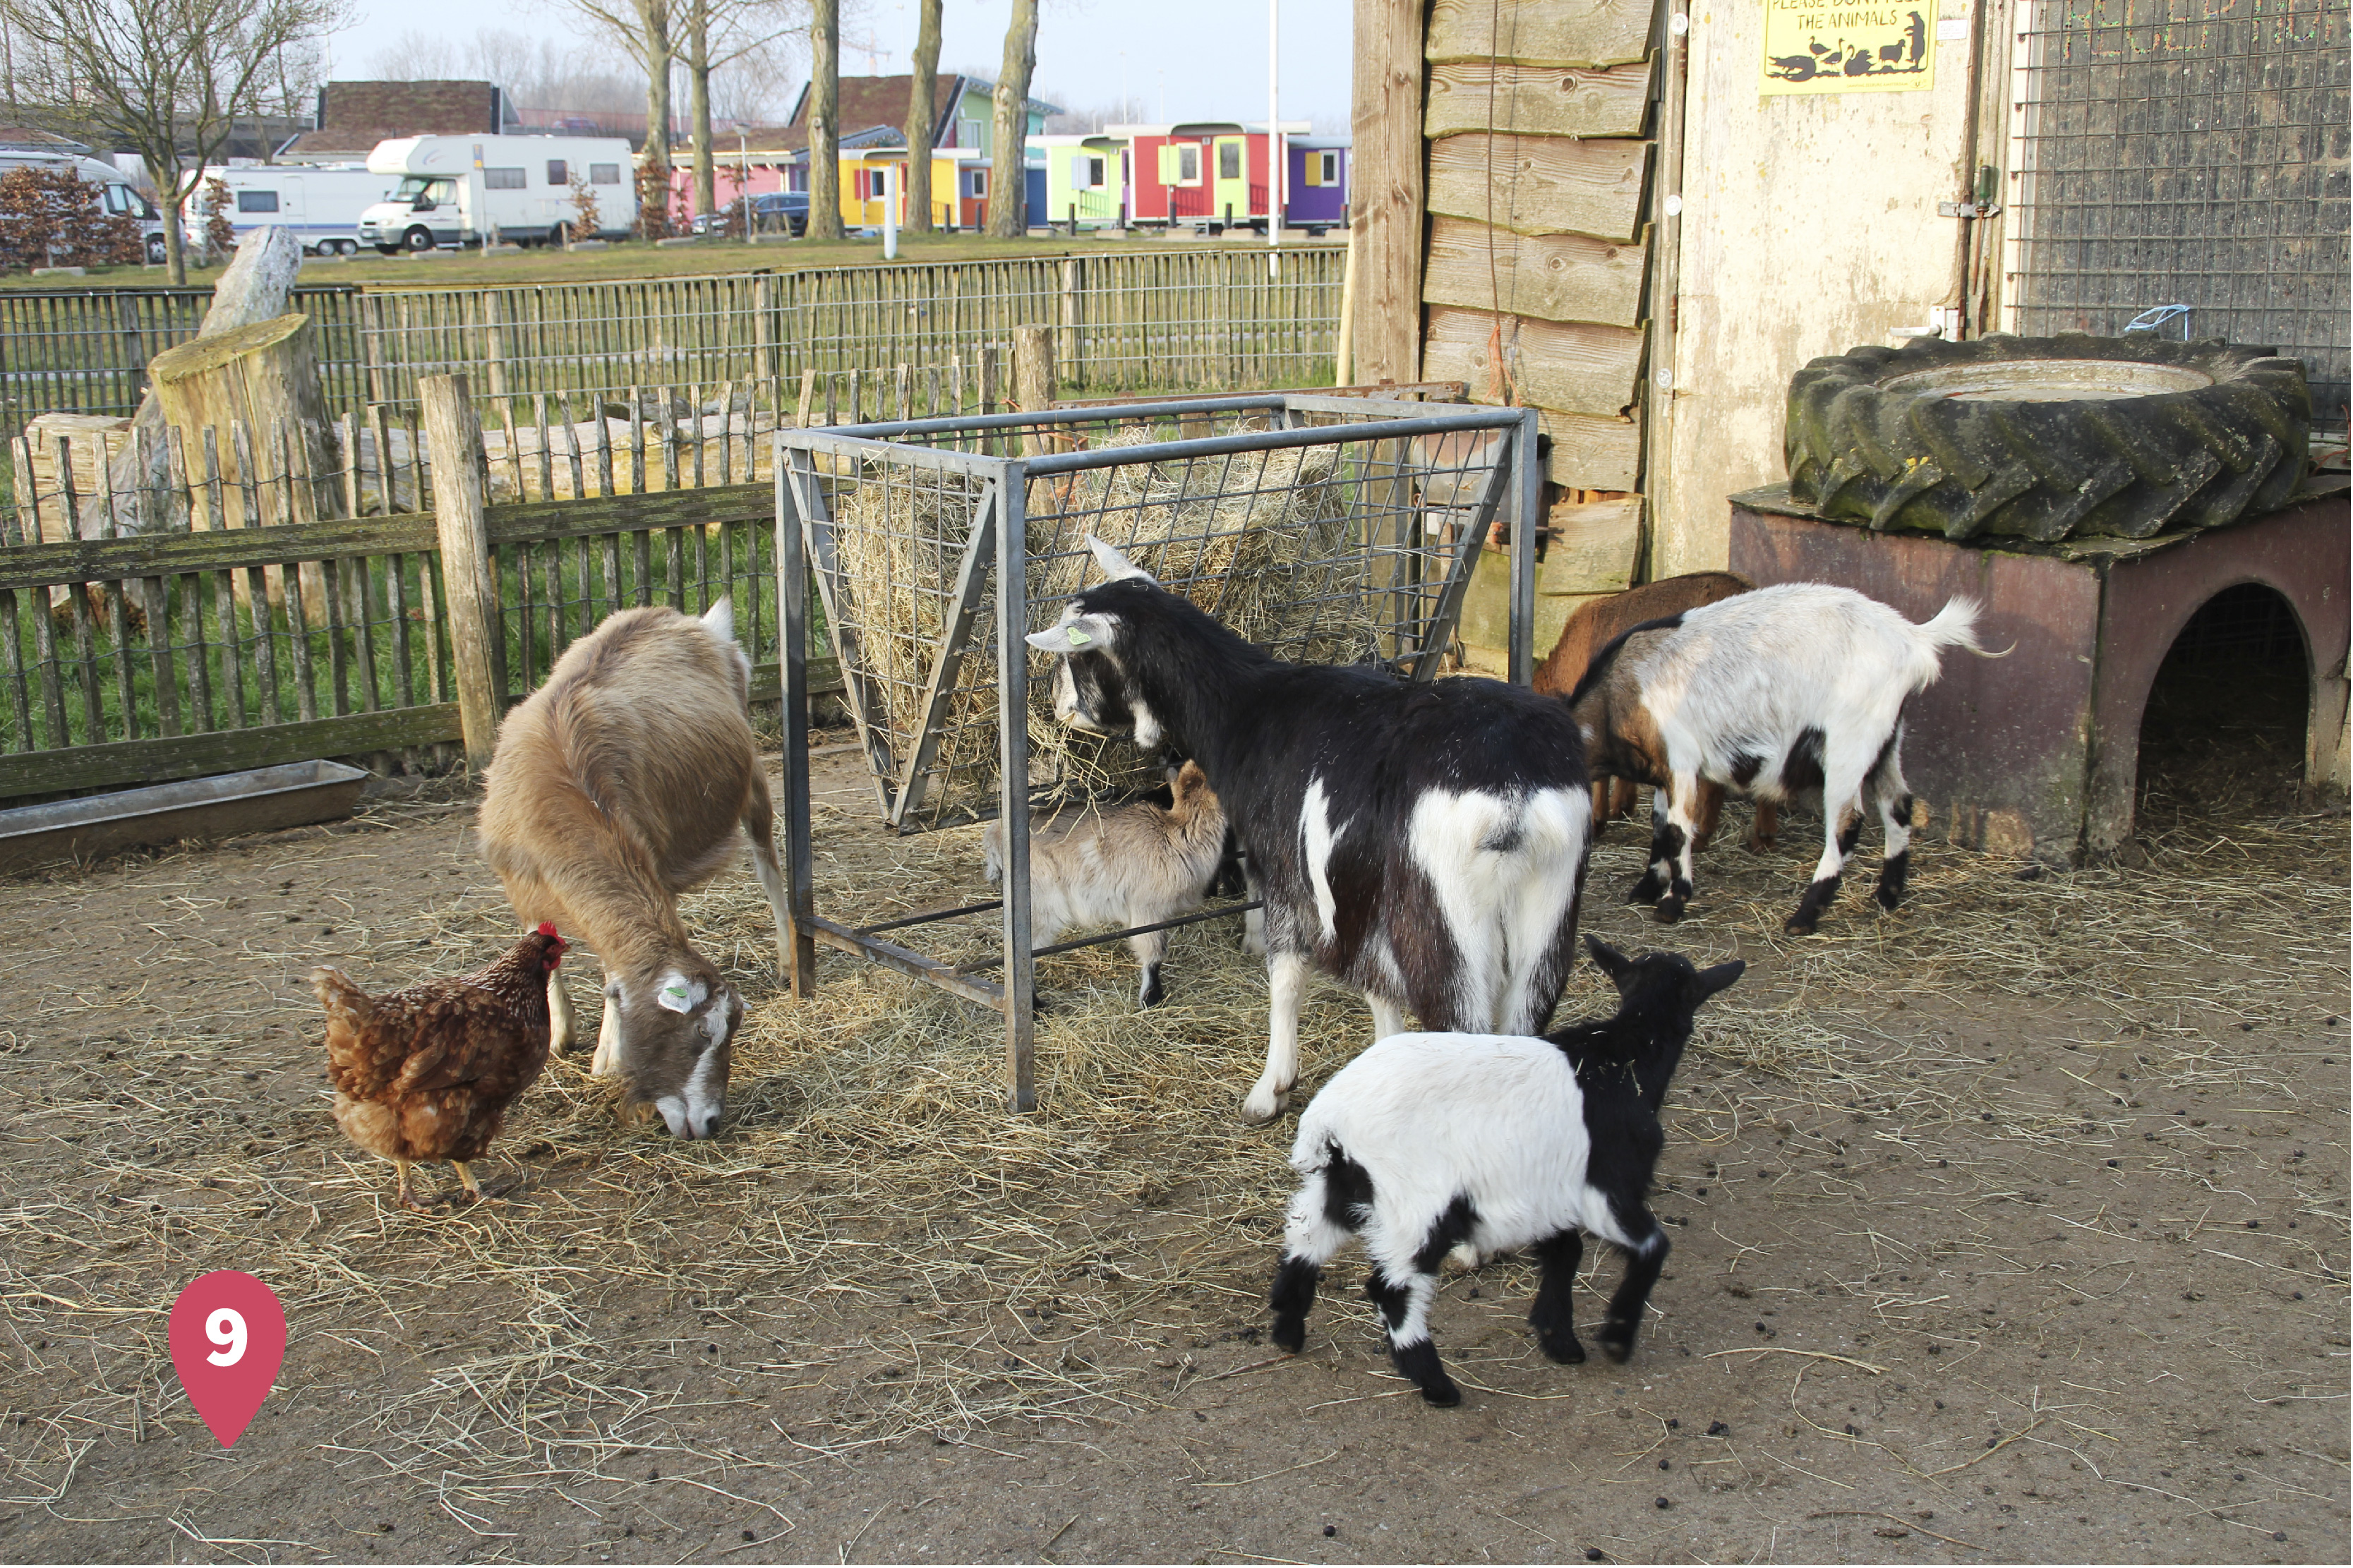 Fritz Park Petting Farm is free and sponsored by Irving.